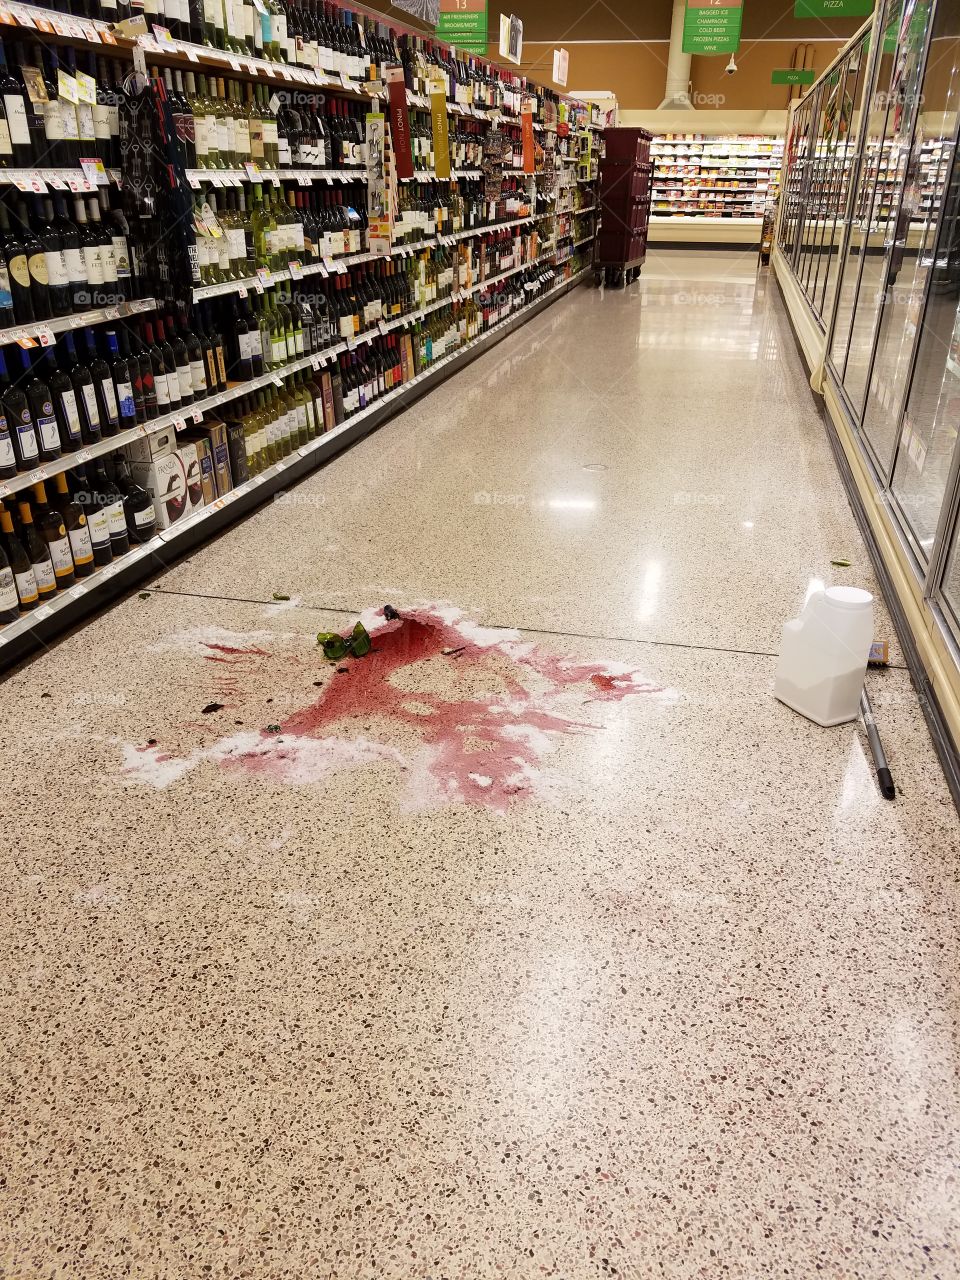 Don't cry over spilled... Wine?